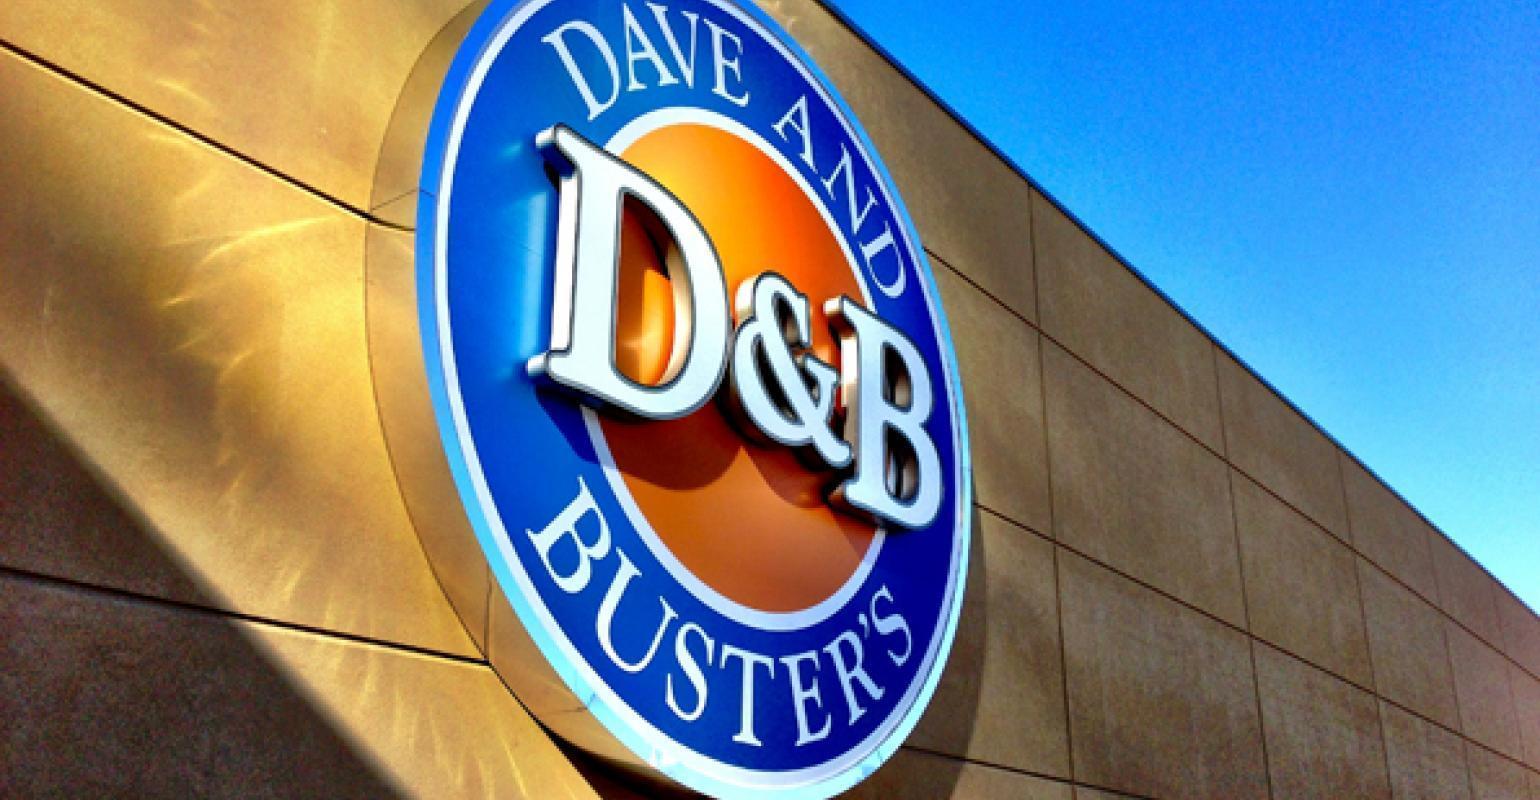 Dave and Buster